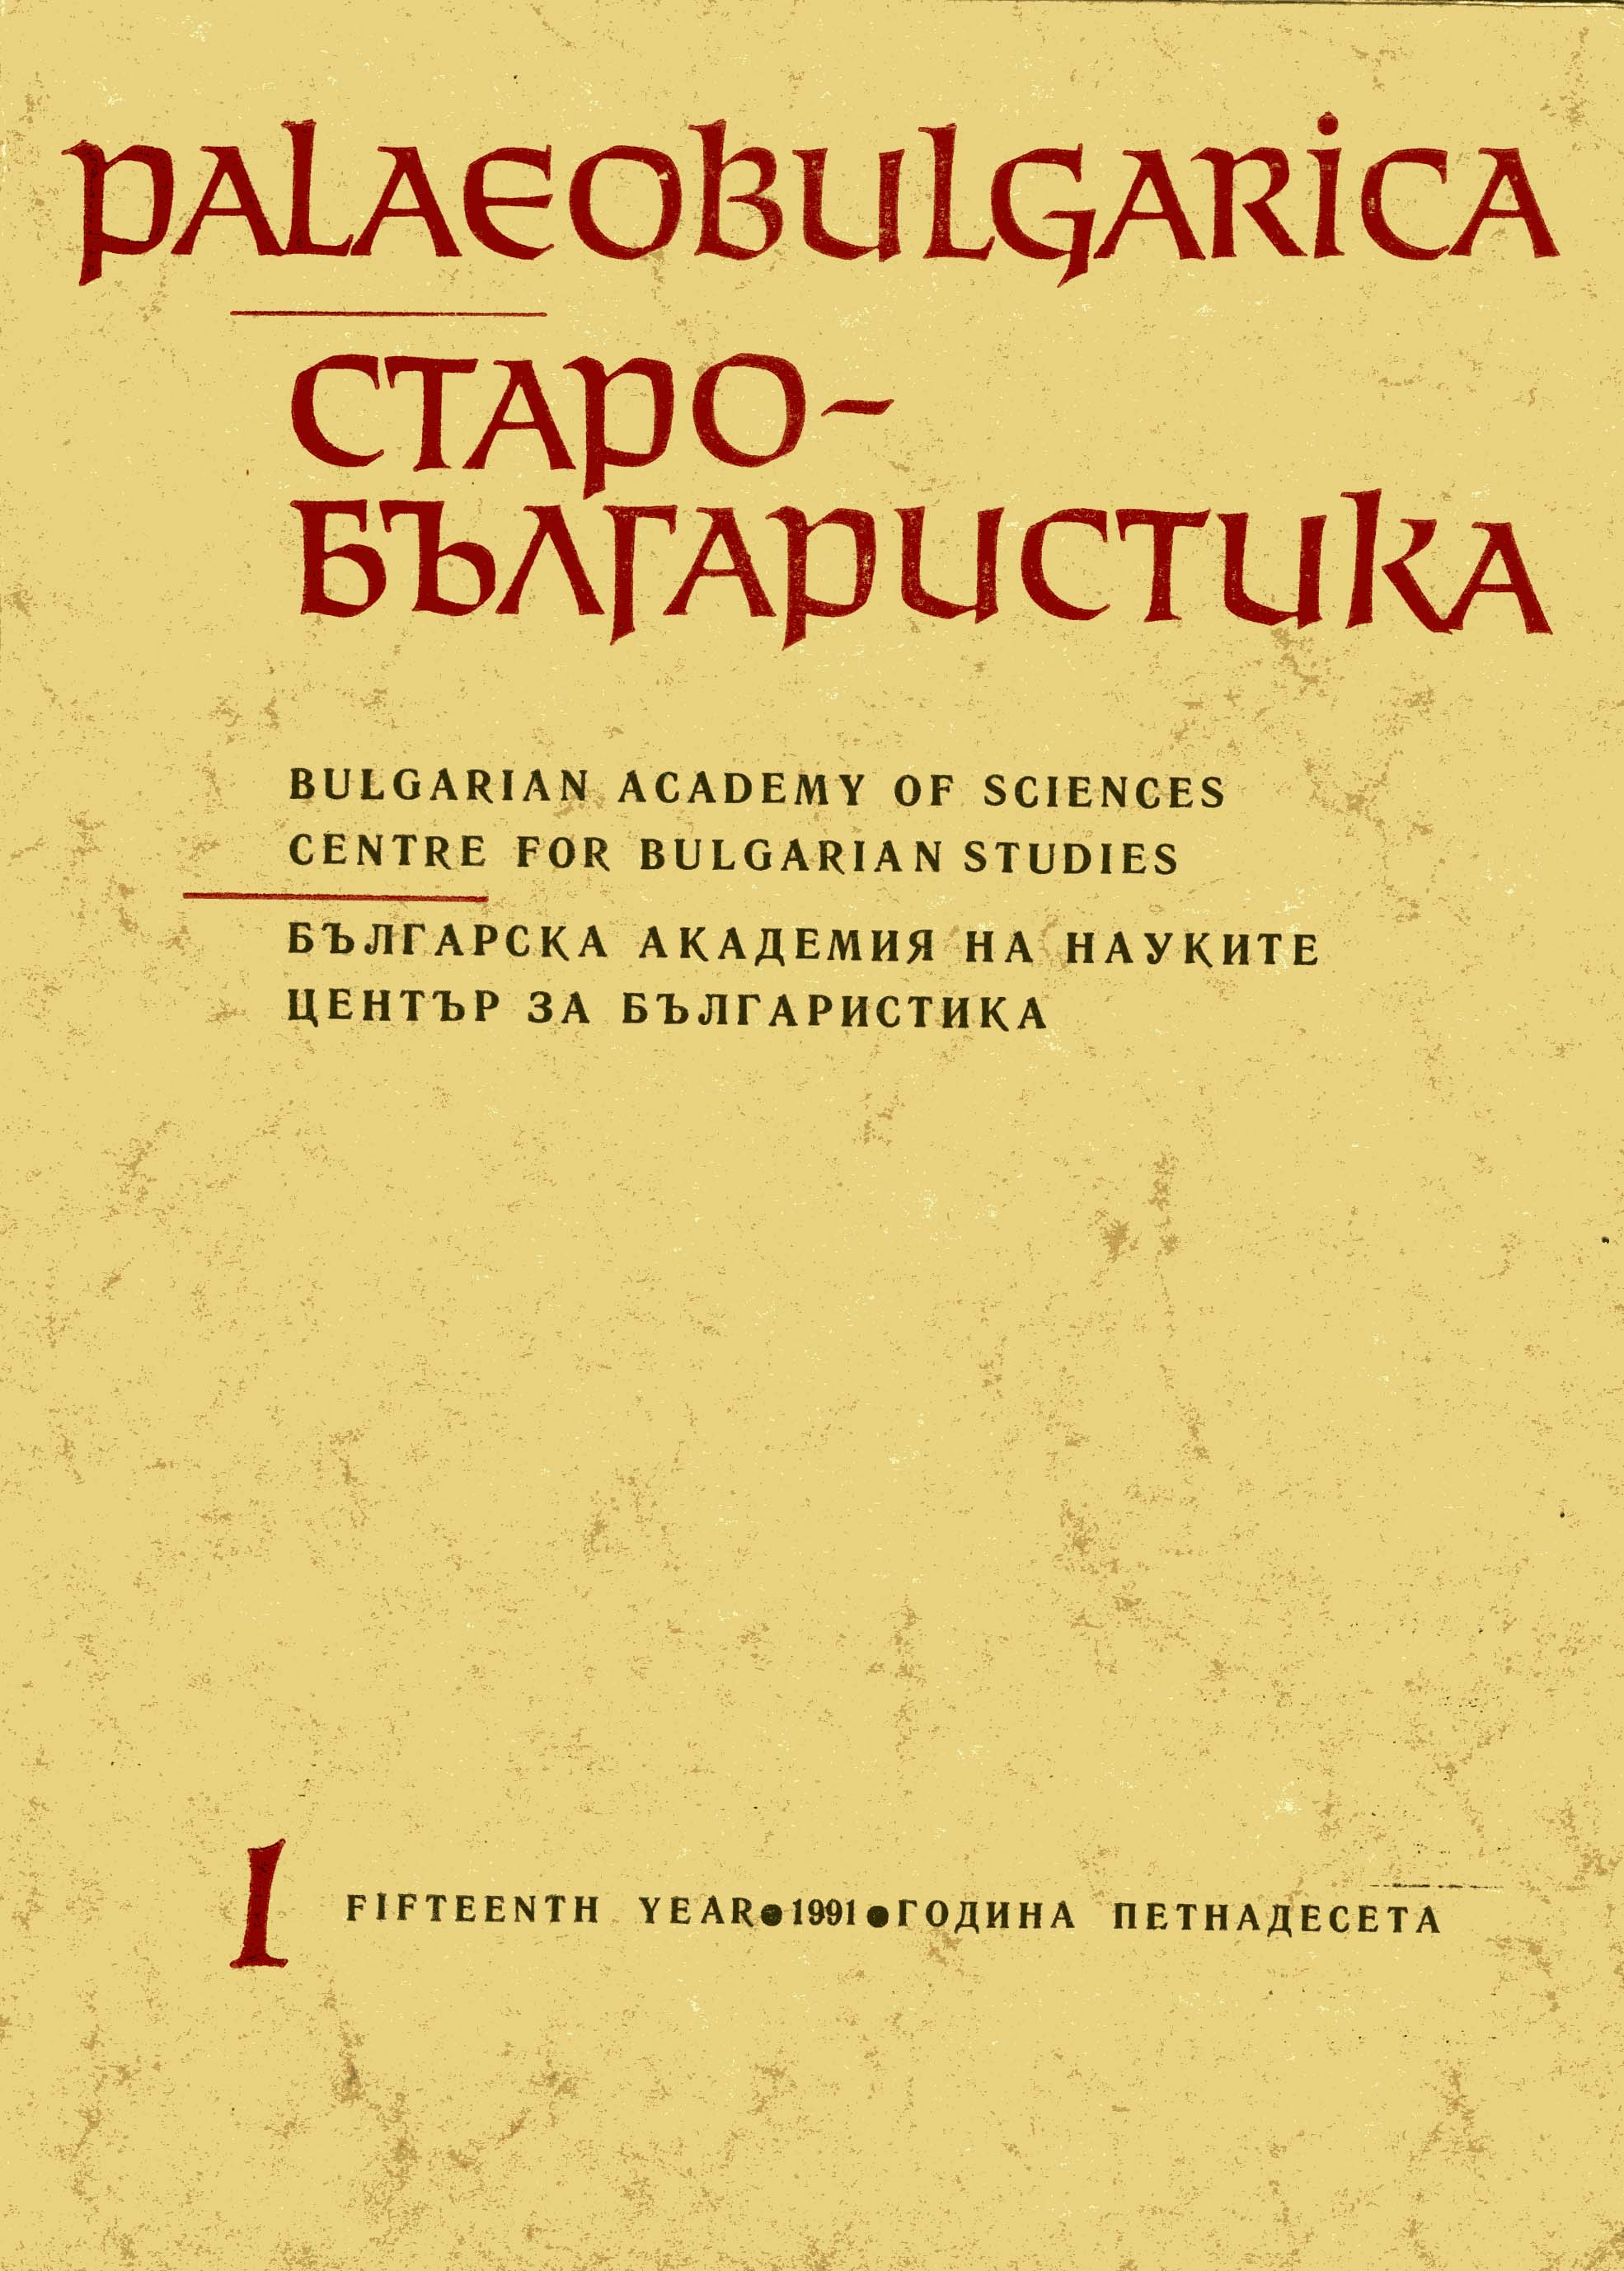 Prof. Jerzy Rusek – Famous Researcher in the Field of Slavic and Bulgarian Studies Cover Image